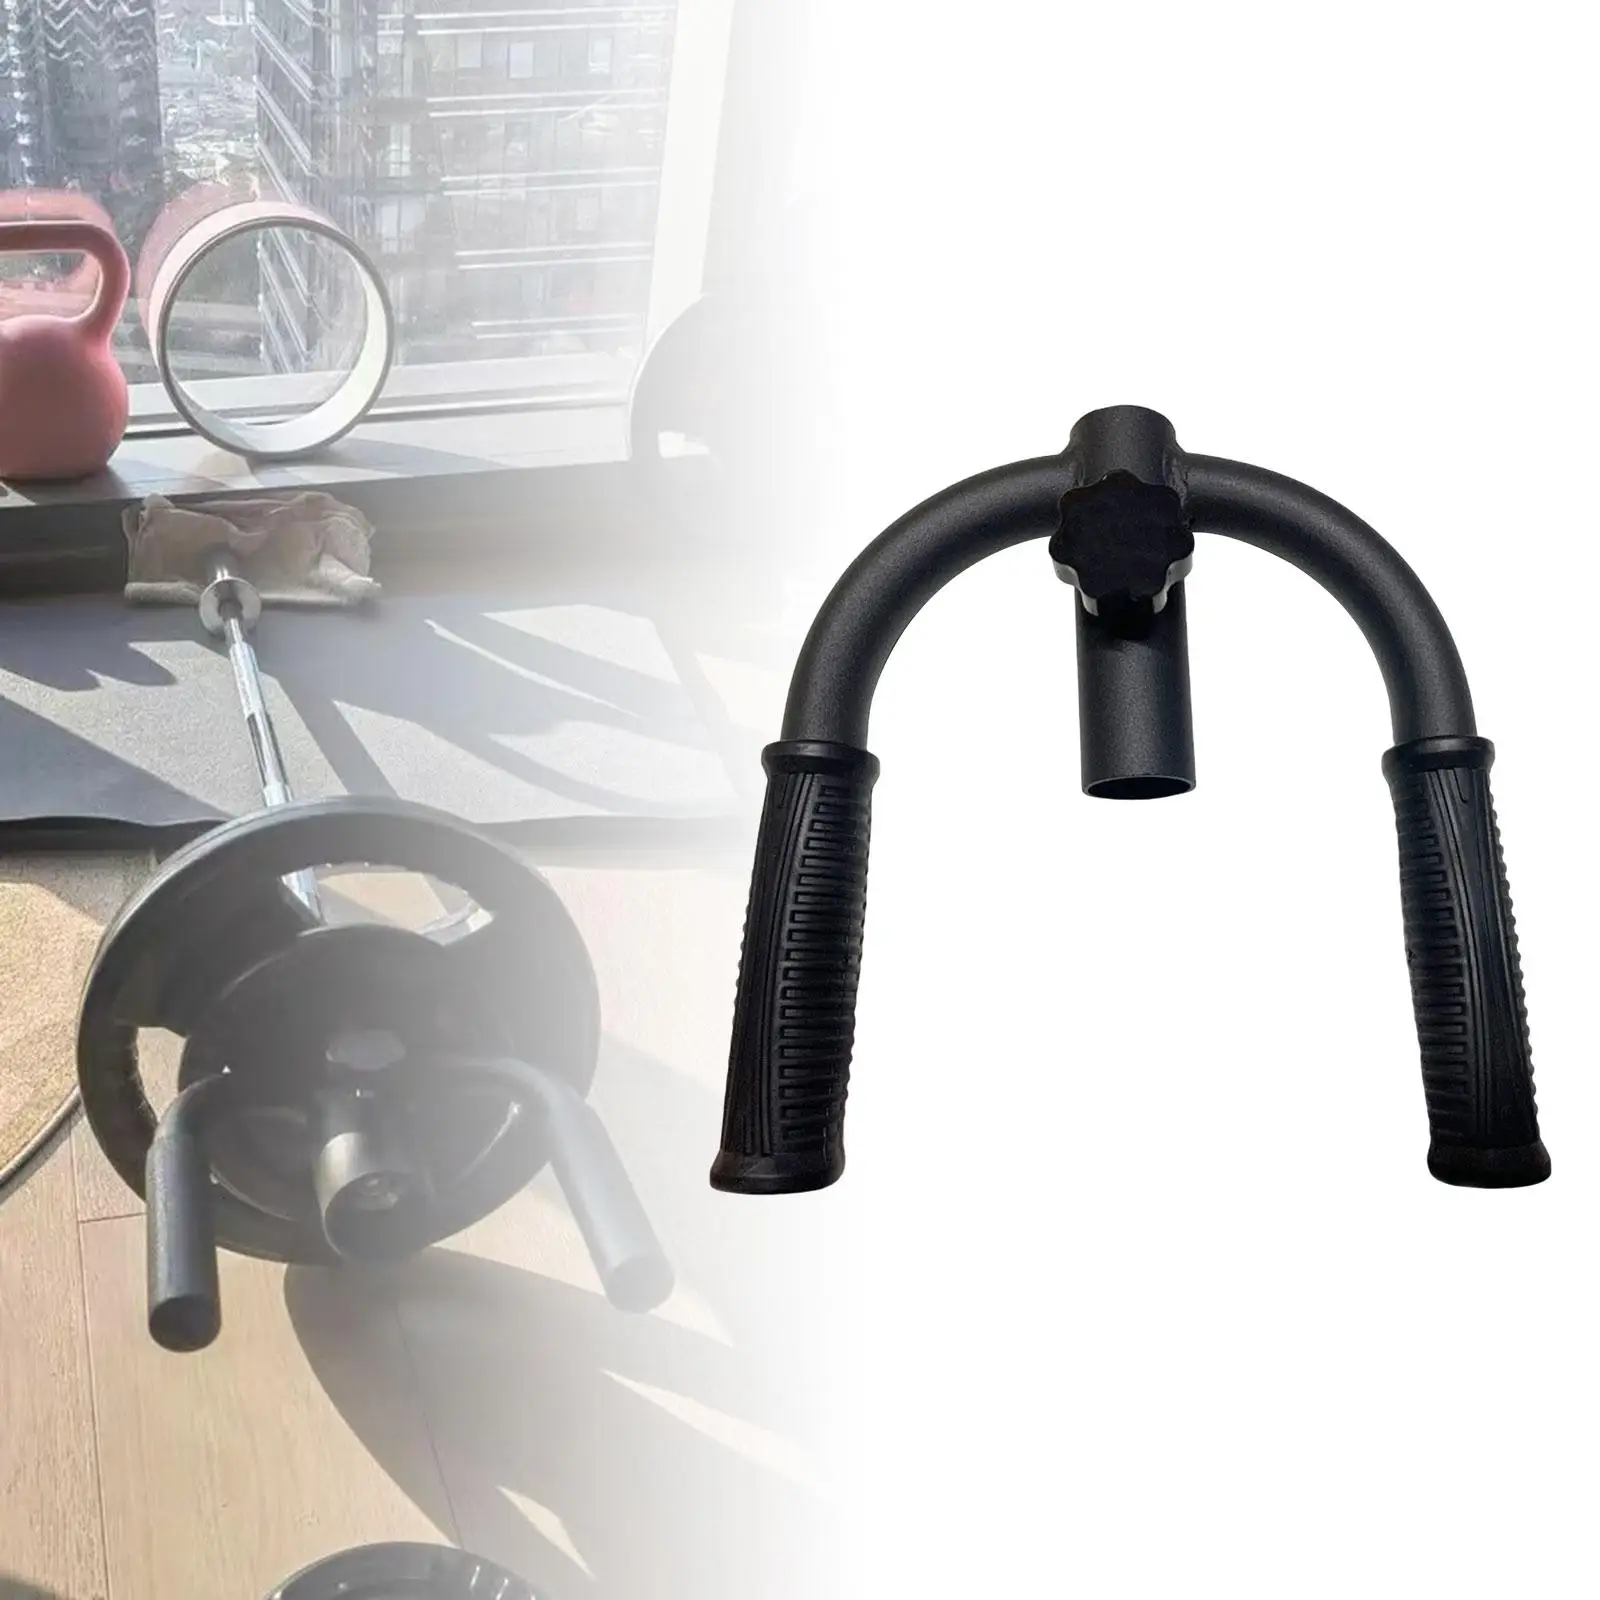 T Bar Row Attachment Fitness Hand Grip for Hamstrings Triceps Lats Strengthens Back Core Muscles Full Body Weightlifting